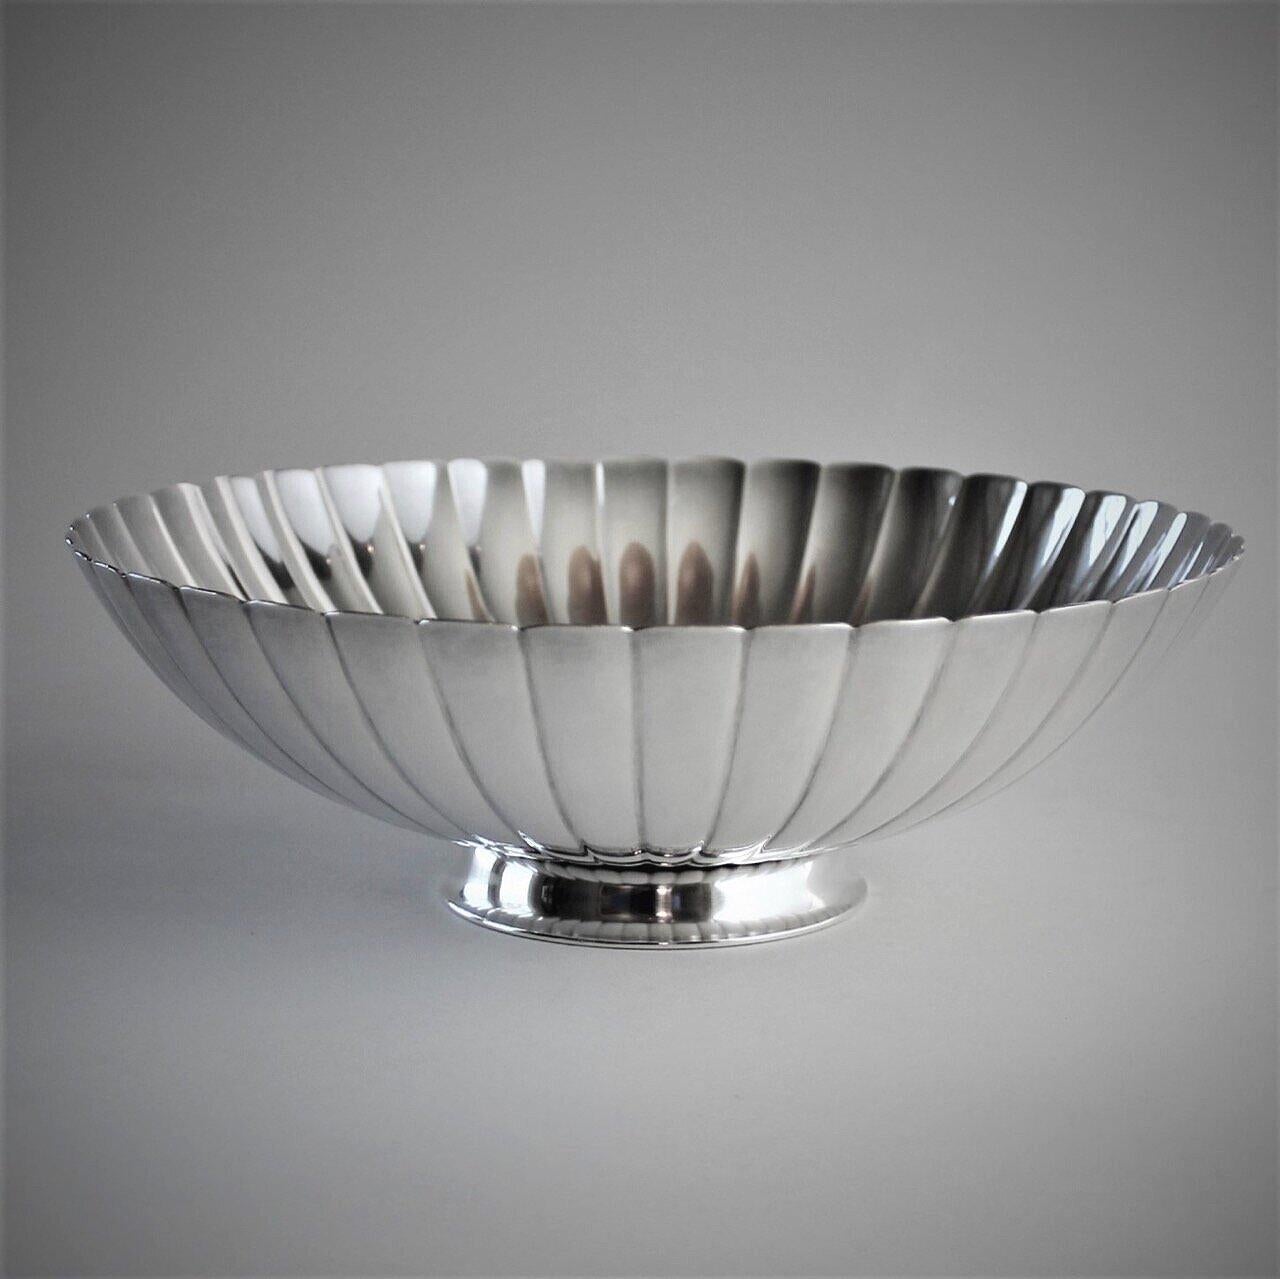 Georg Jensen sterling silver strawberry bowl, No.856 by Sigvard Bernadotte

Early Hallmarks from 1933-1944

A similar example can be seen in the book Georg Jensen Holloware, The Silver Fund collection by David Taylor and Jason Laskey, pg